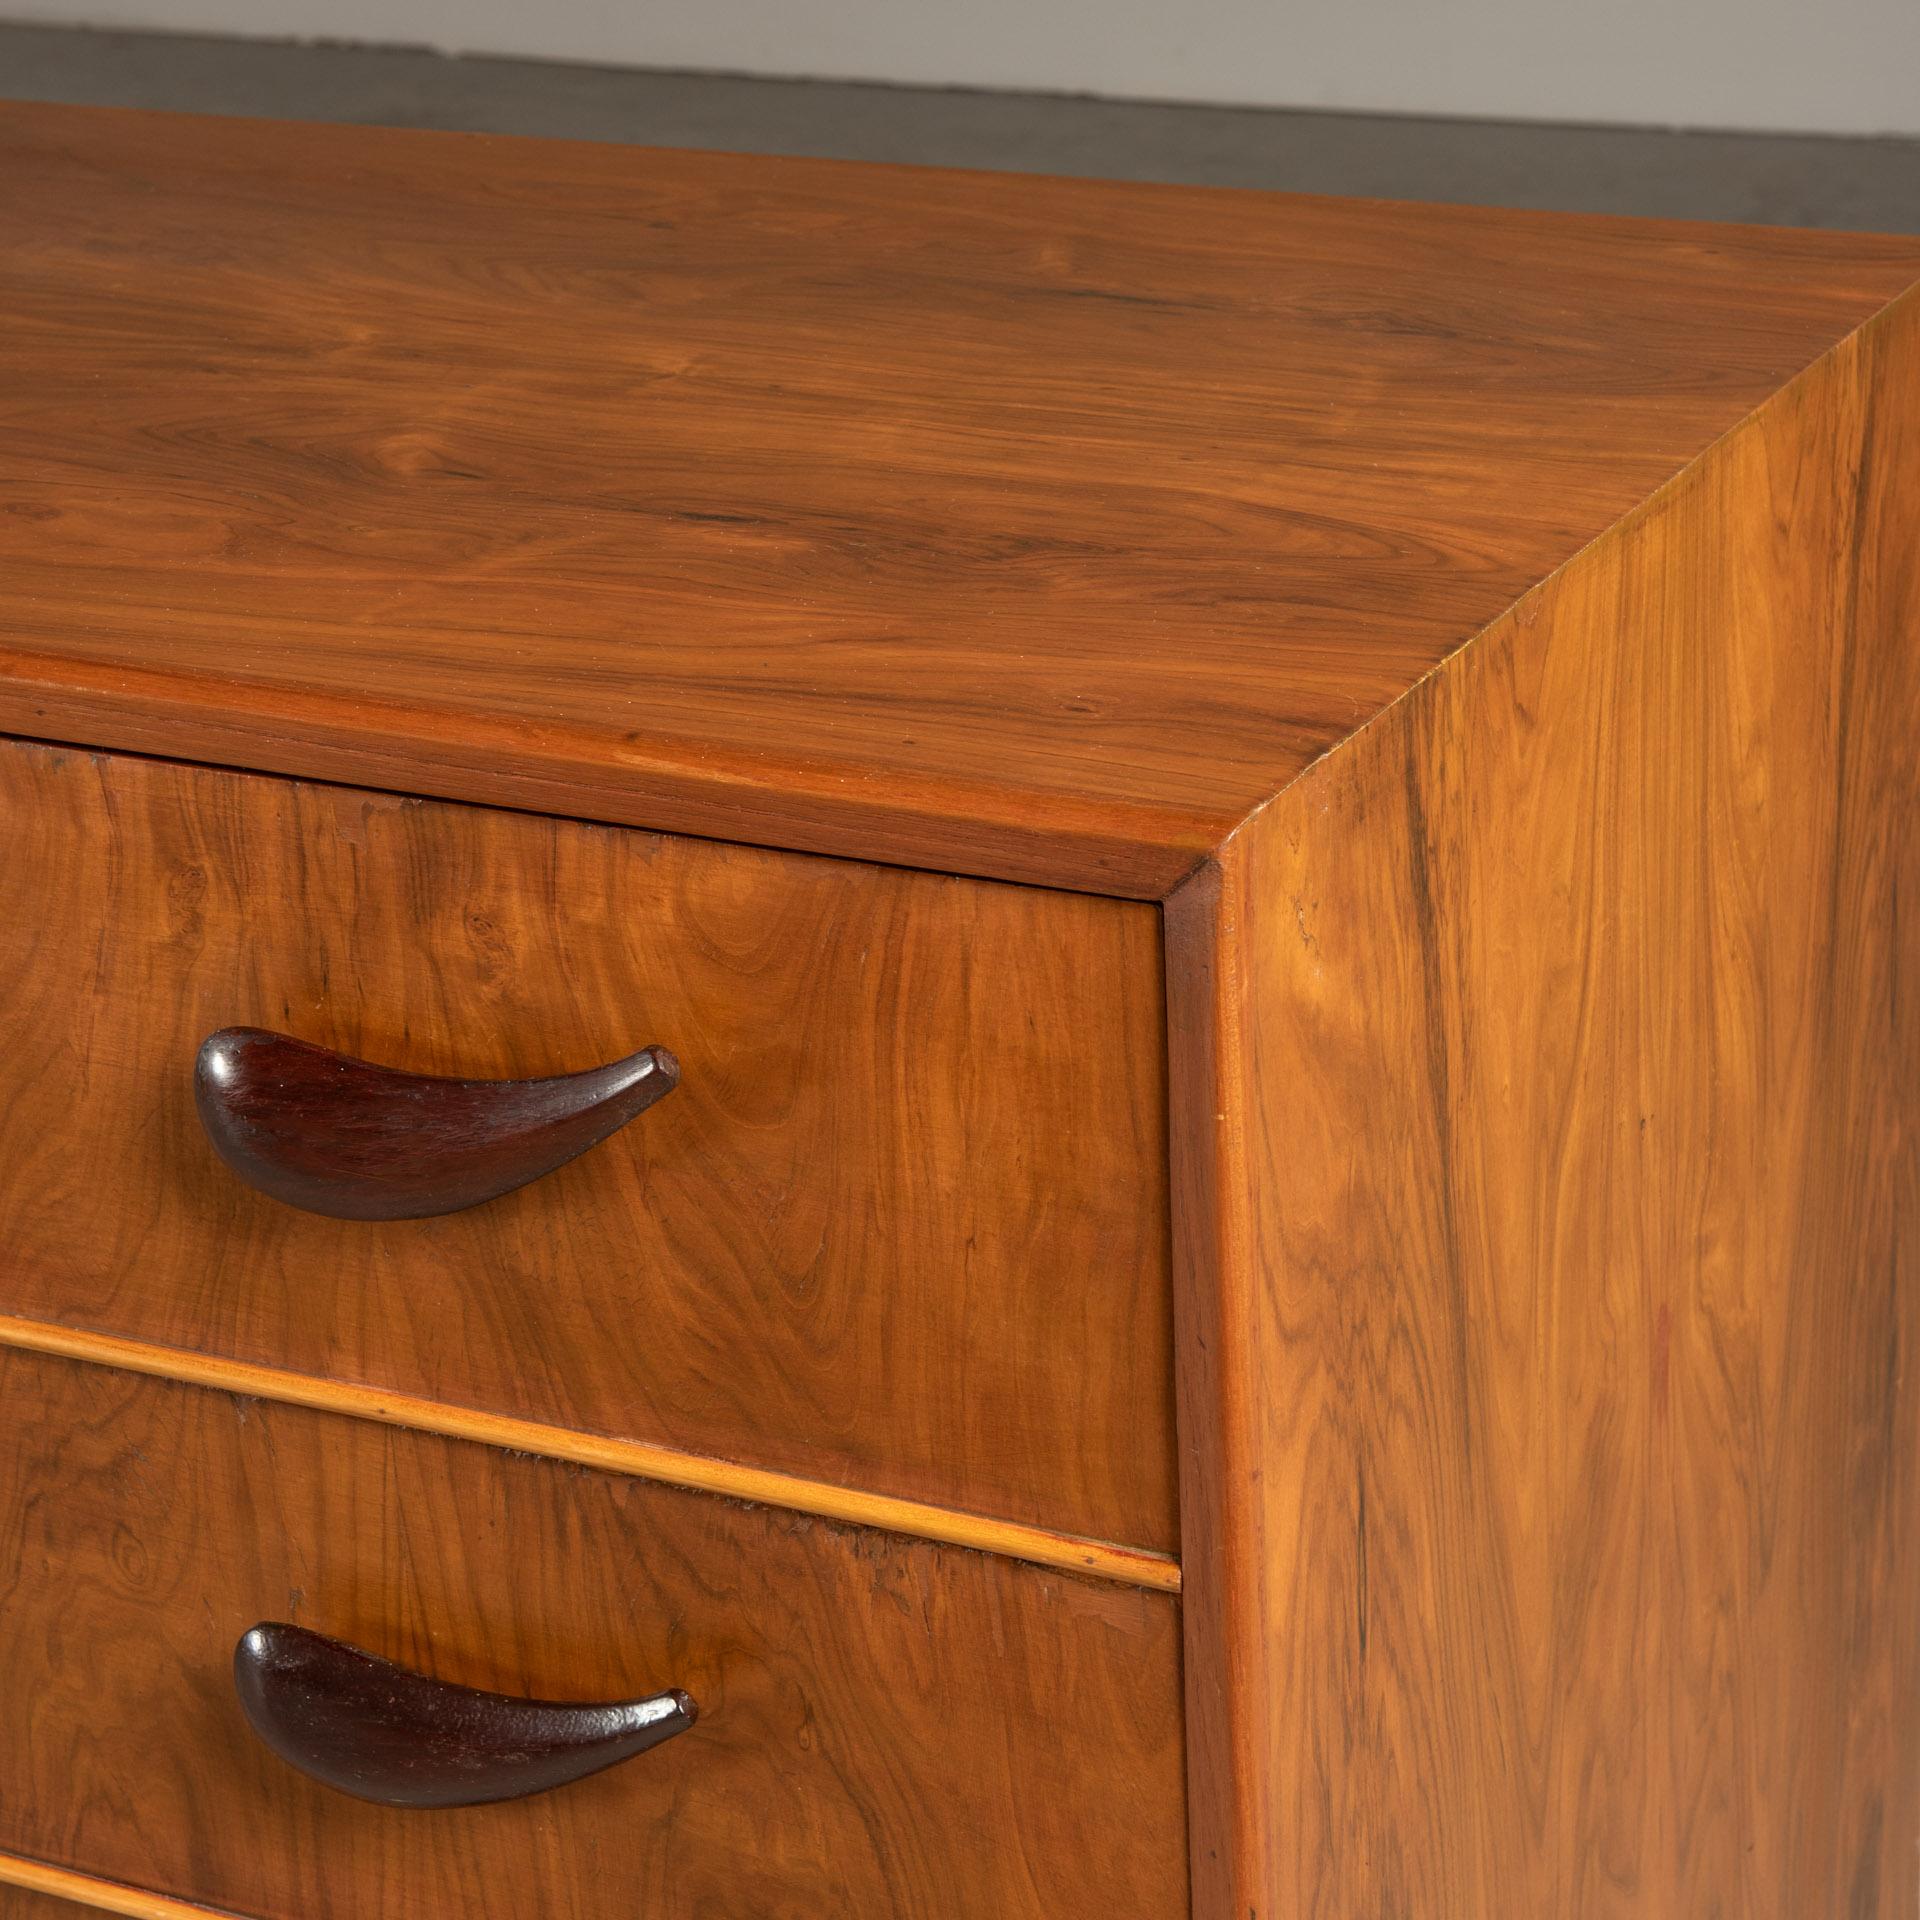 Chest of Drawers in Solid Hardwood, by Móveis Cimo, Brazilian Mid-Century Modern For Sale 1